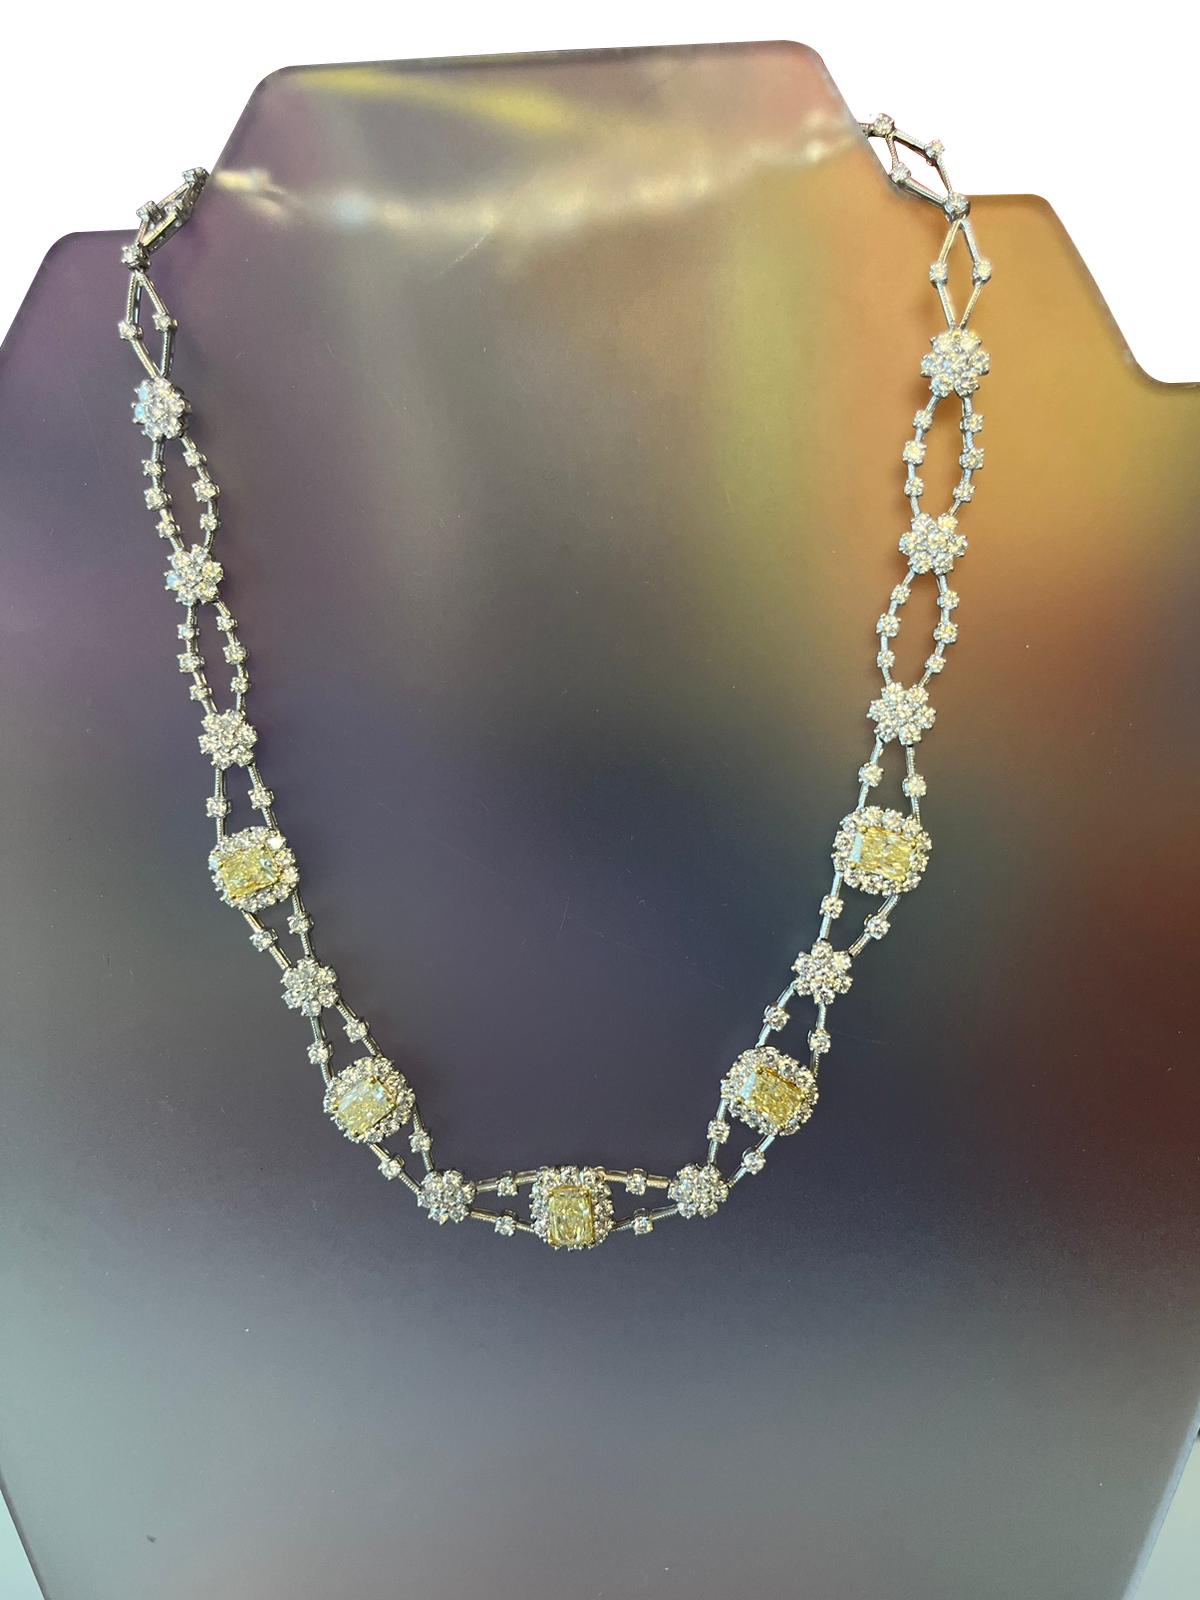 11.8ctw Natural Radiant Cut Yellow Fancy Color 5.80ct White Diamonds Necklace In Good Condition For Sale In Aventura, FL